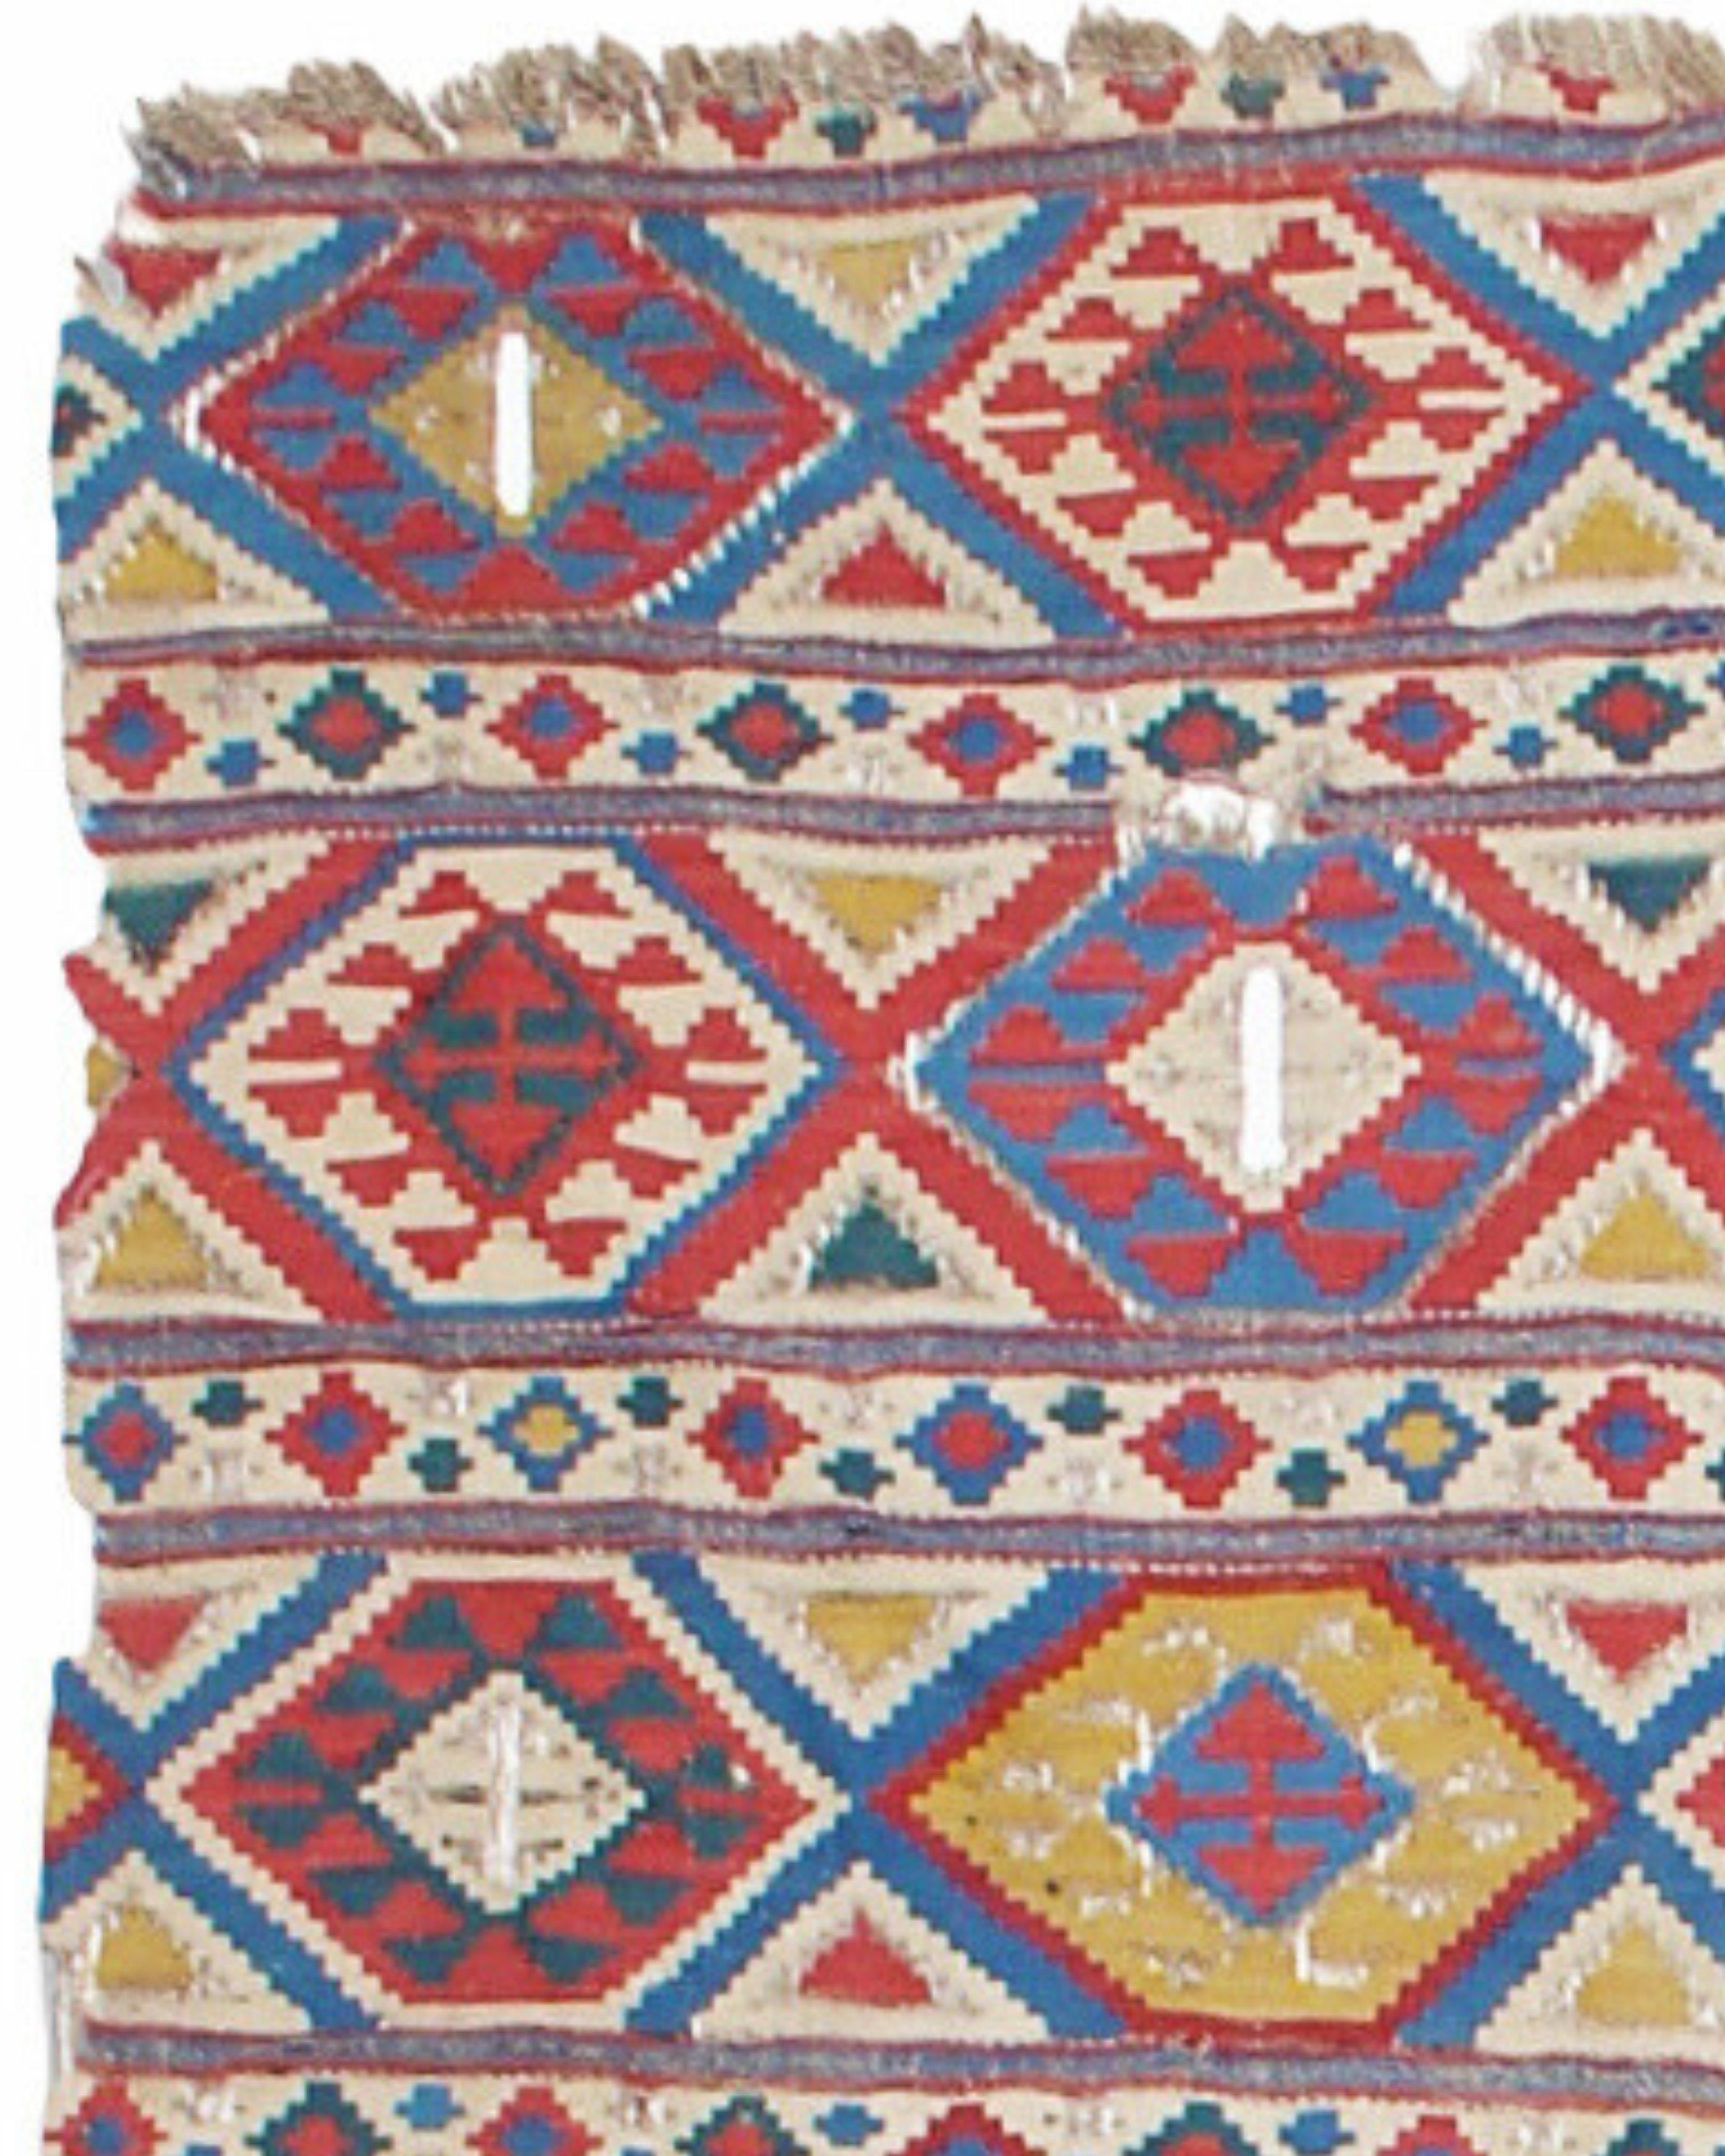 Hand-Woven Antique Caucasian Shirvan Kilim Rug, Late 19th Century For Sale